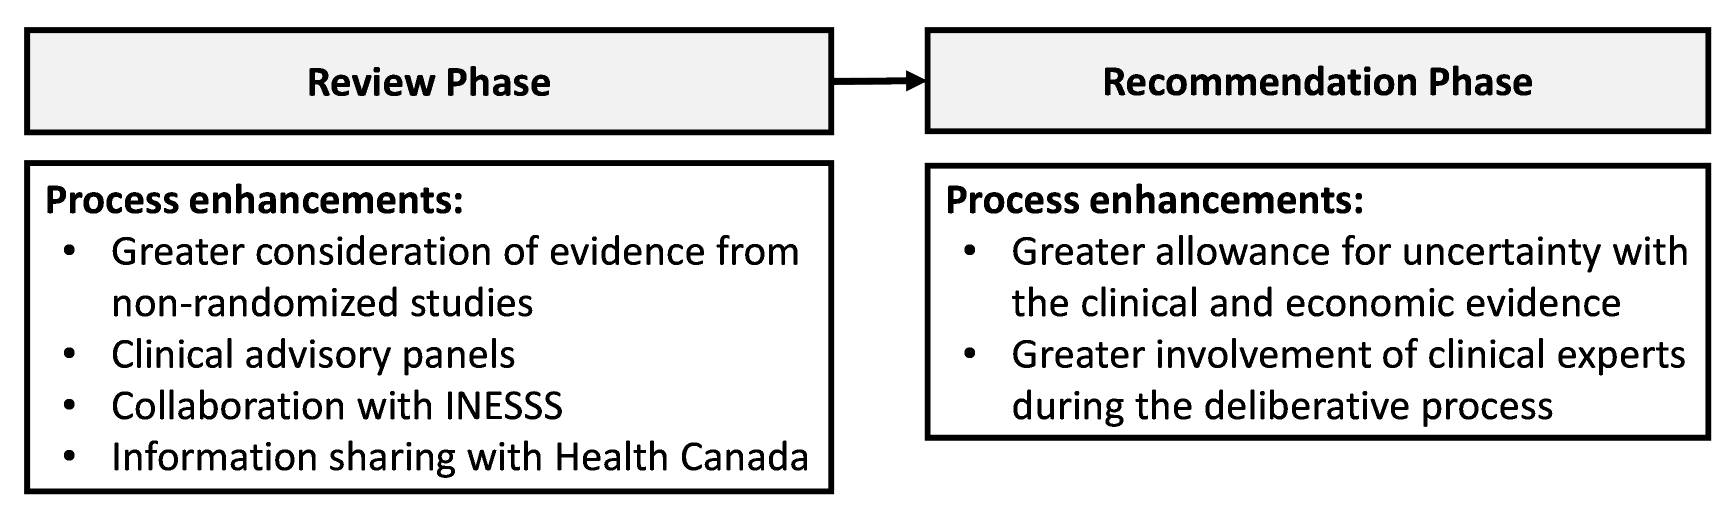 Flow chart of the process enhancements at the review and recommendation phases for DRDs and other complex drugs.